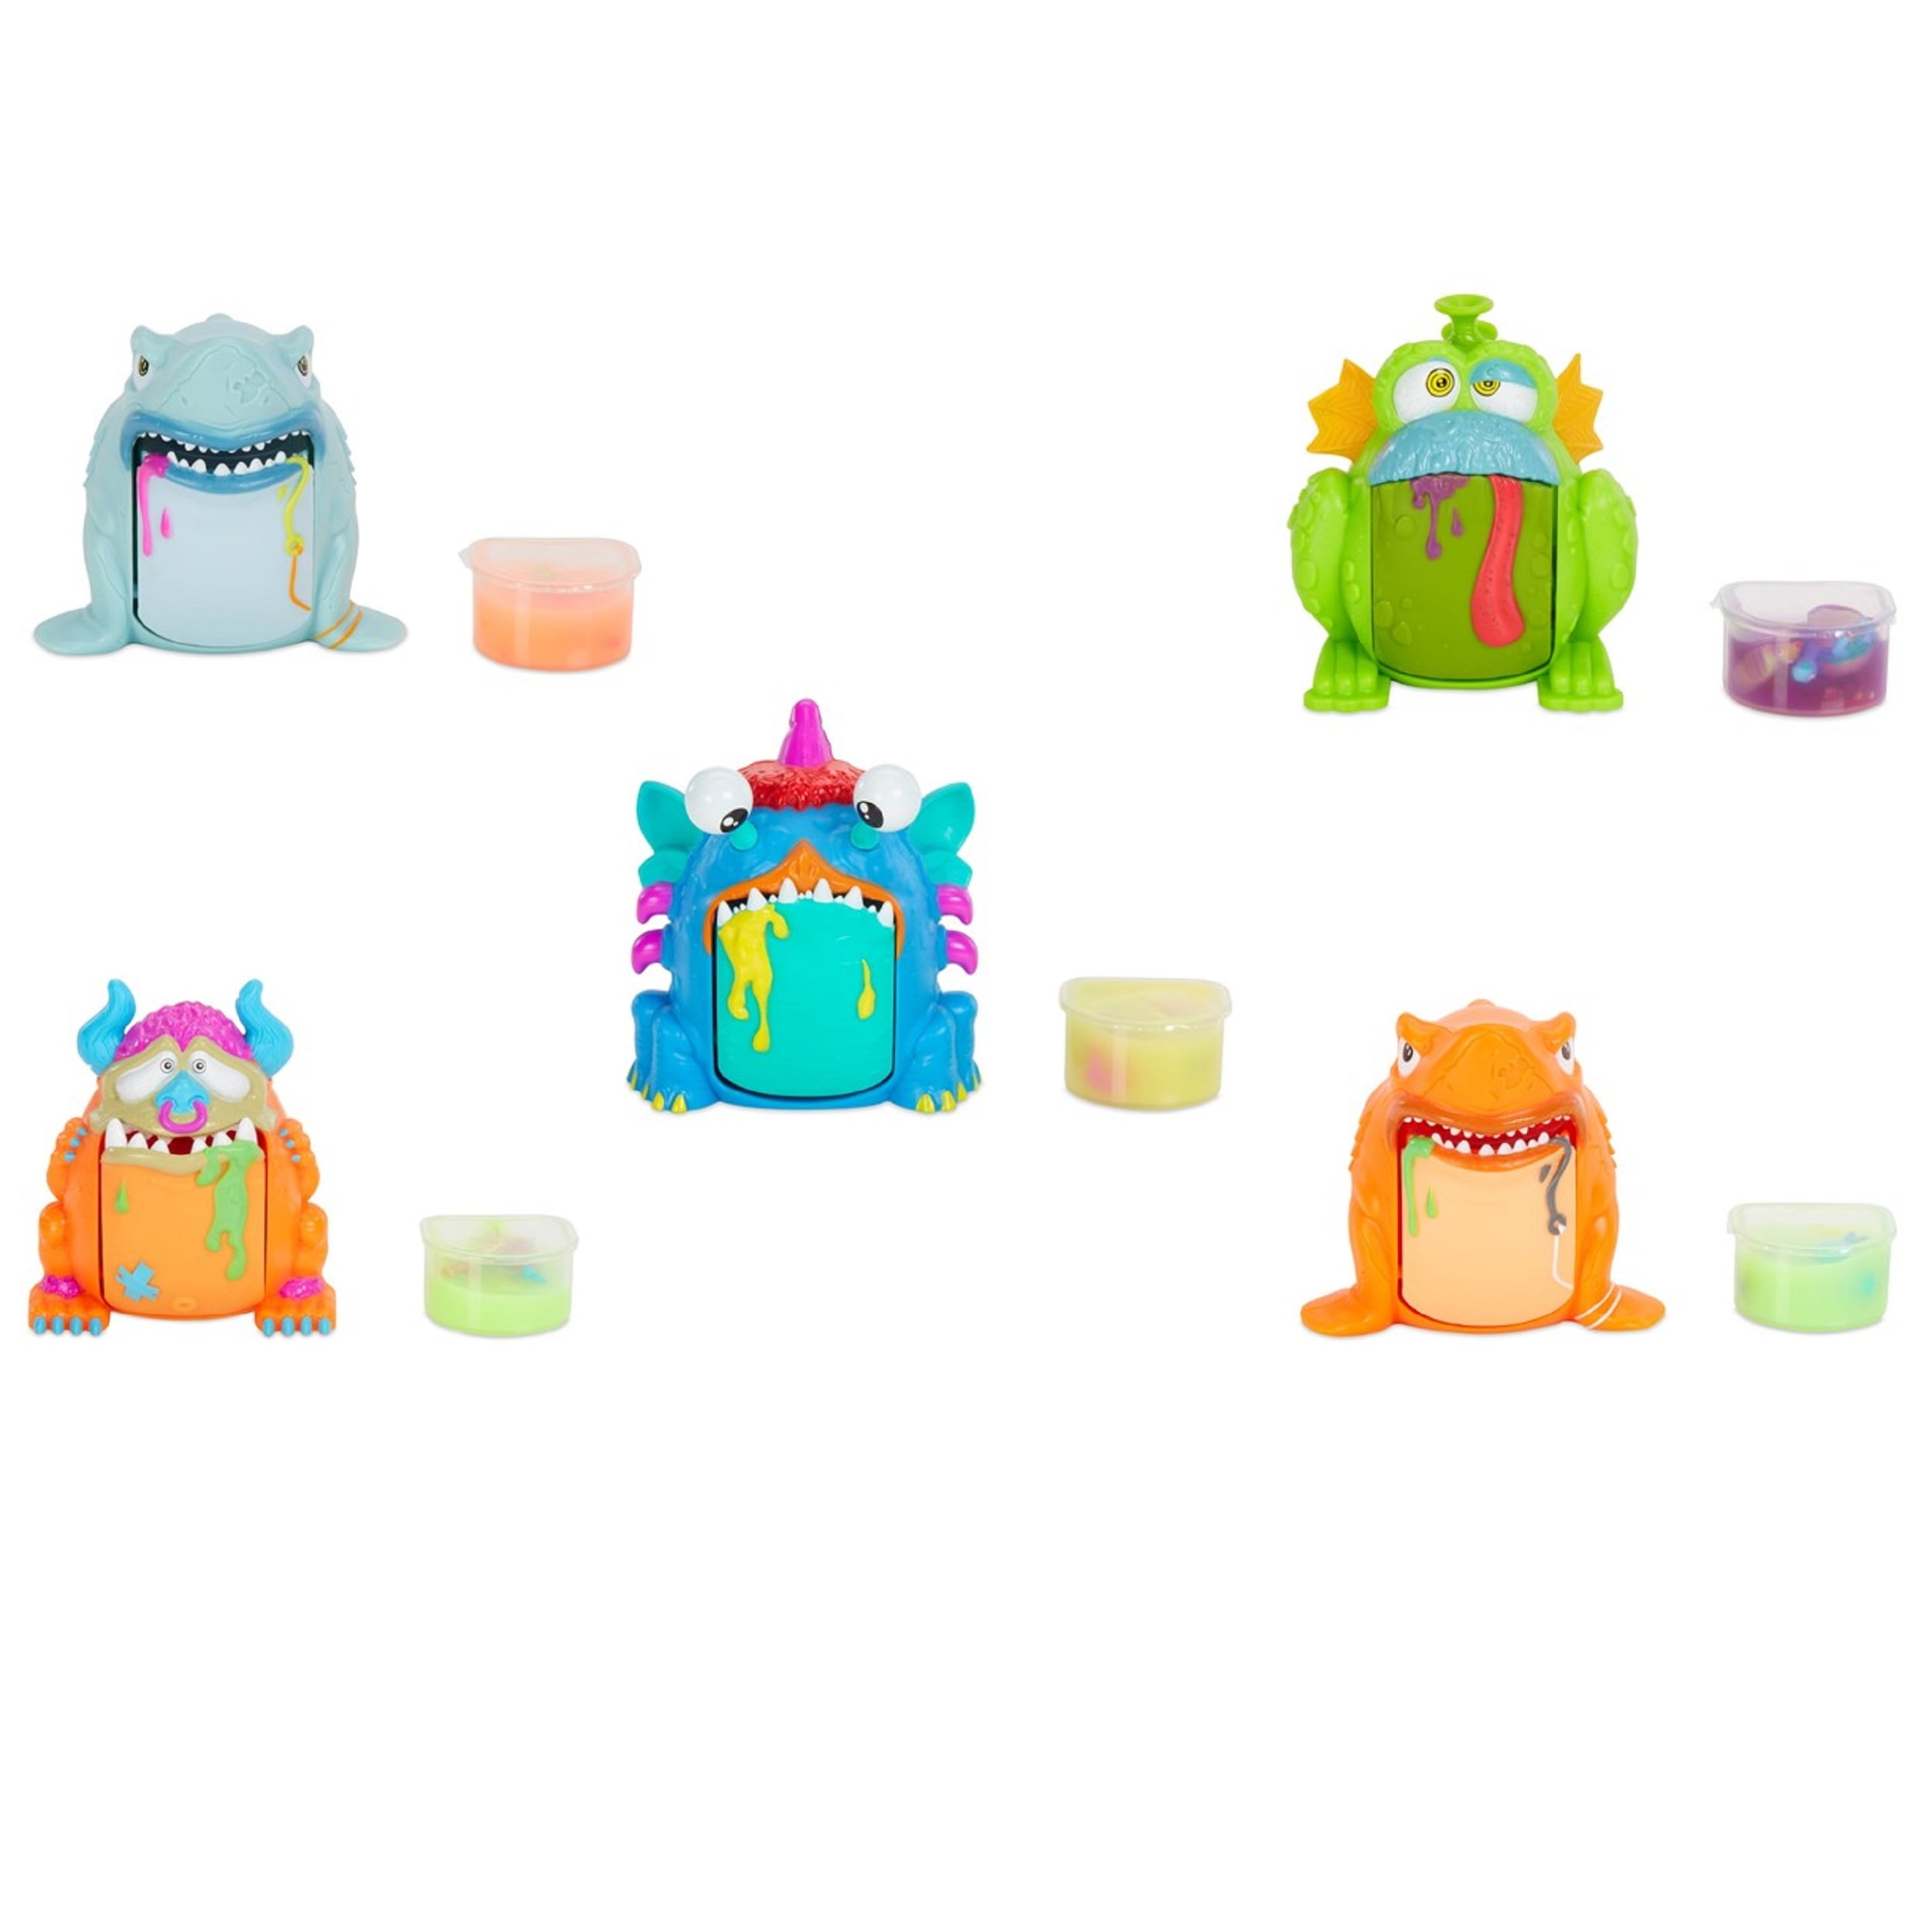 BARF BUDDIES MATEY WITH PUKE PALS & SLIME!! MGA CRATE CREATURES SURPRISE 